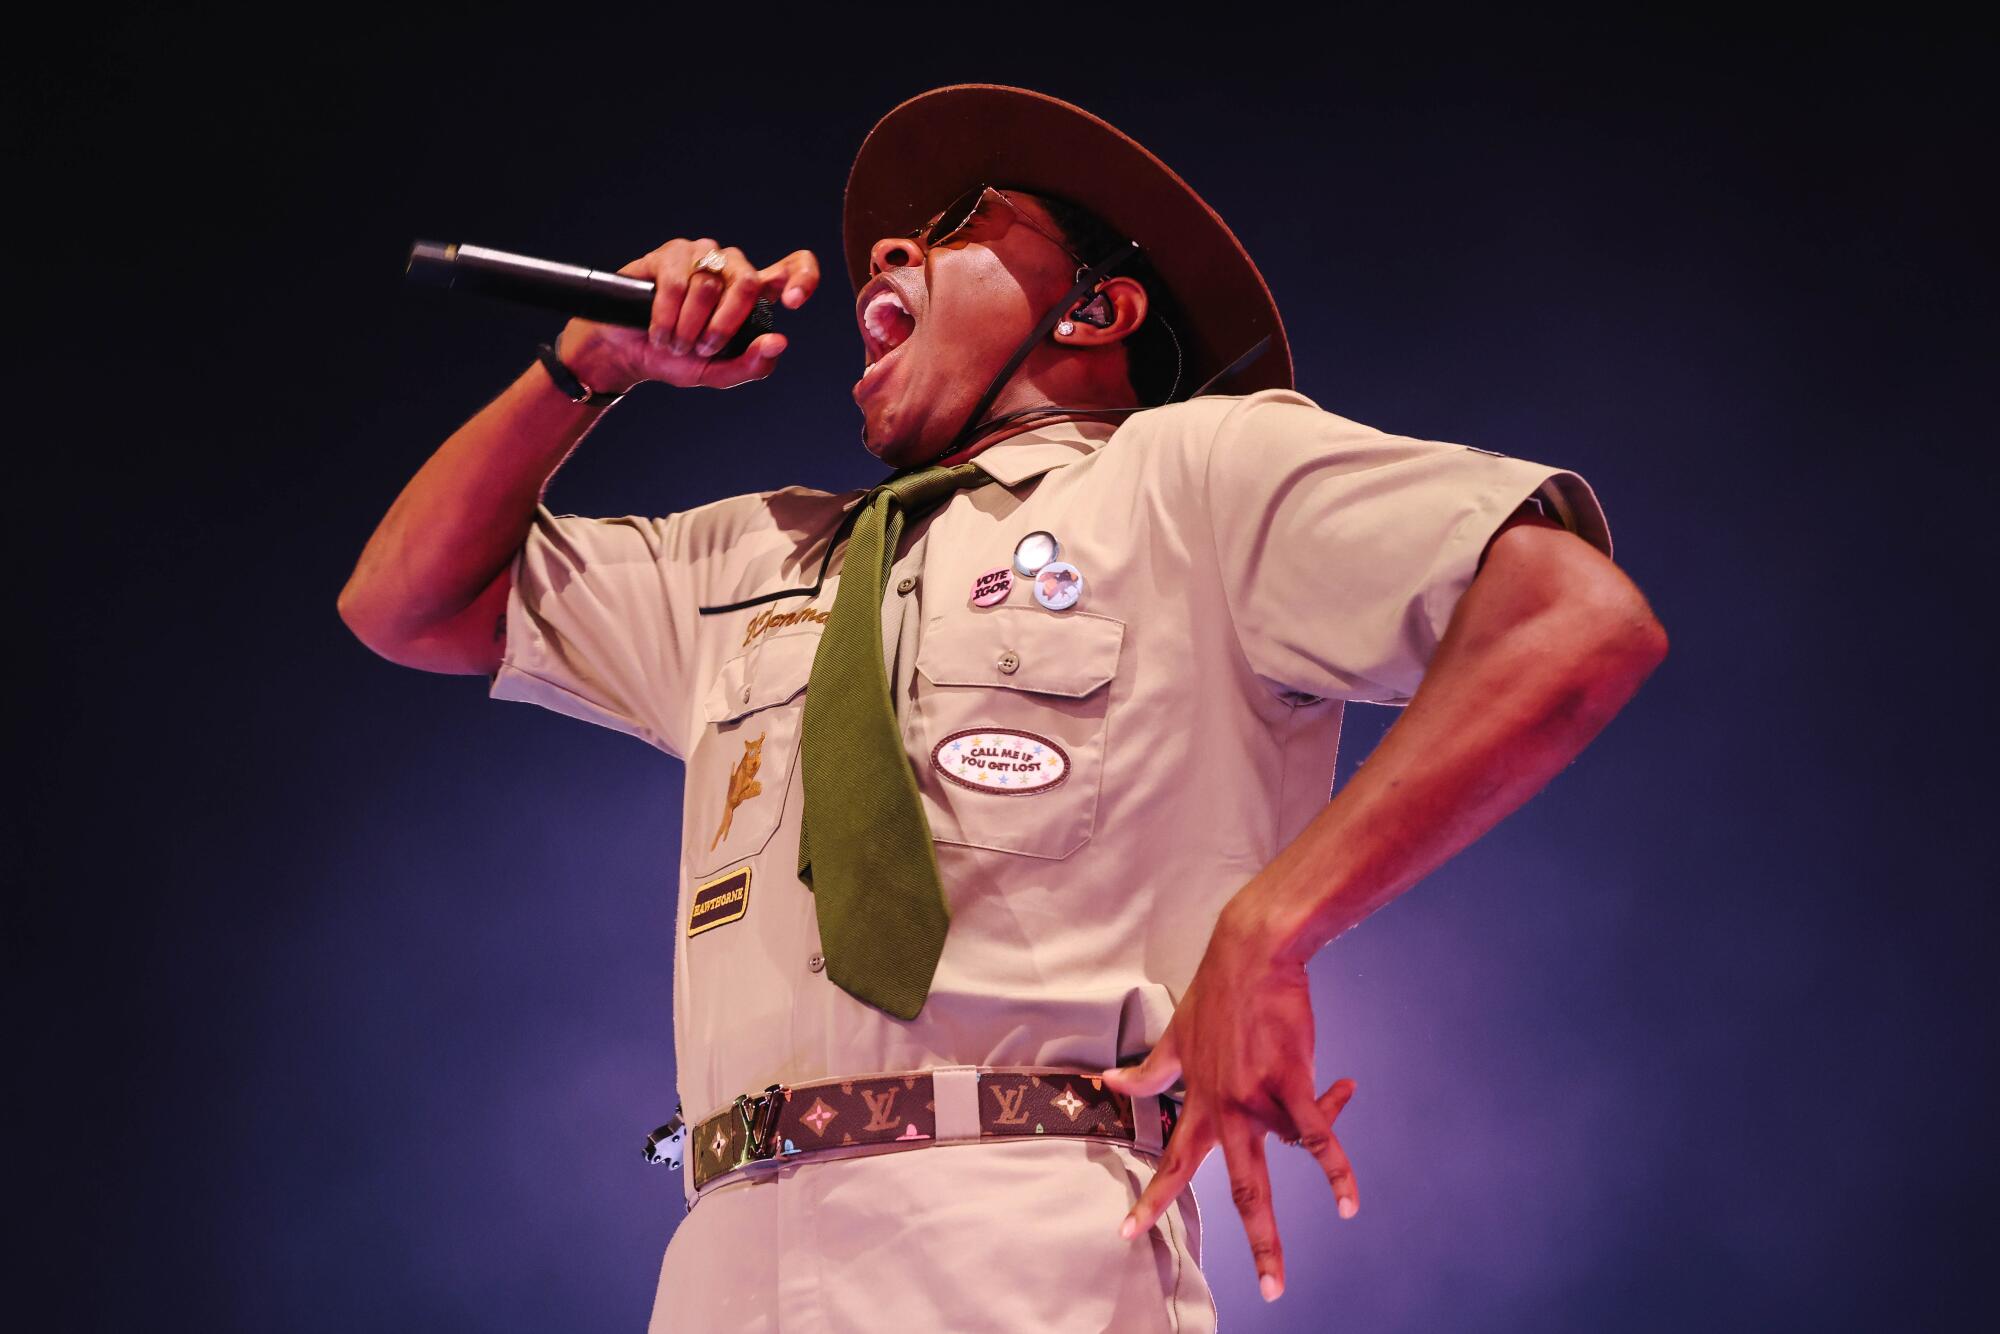 Tyler, the Creator performs at the Coachella Valley Music and Arts Festival.